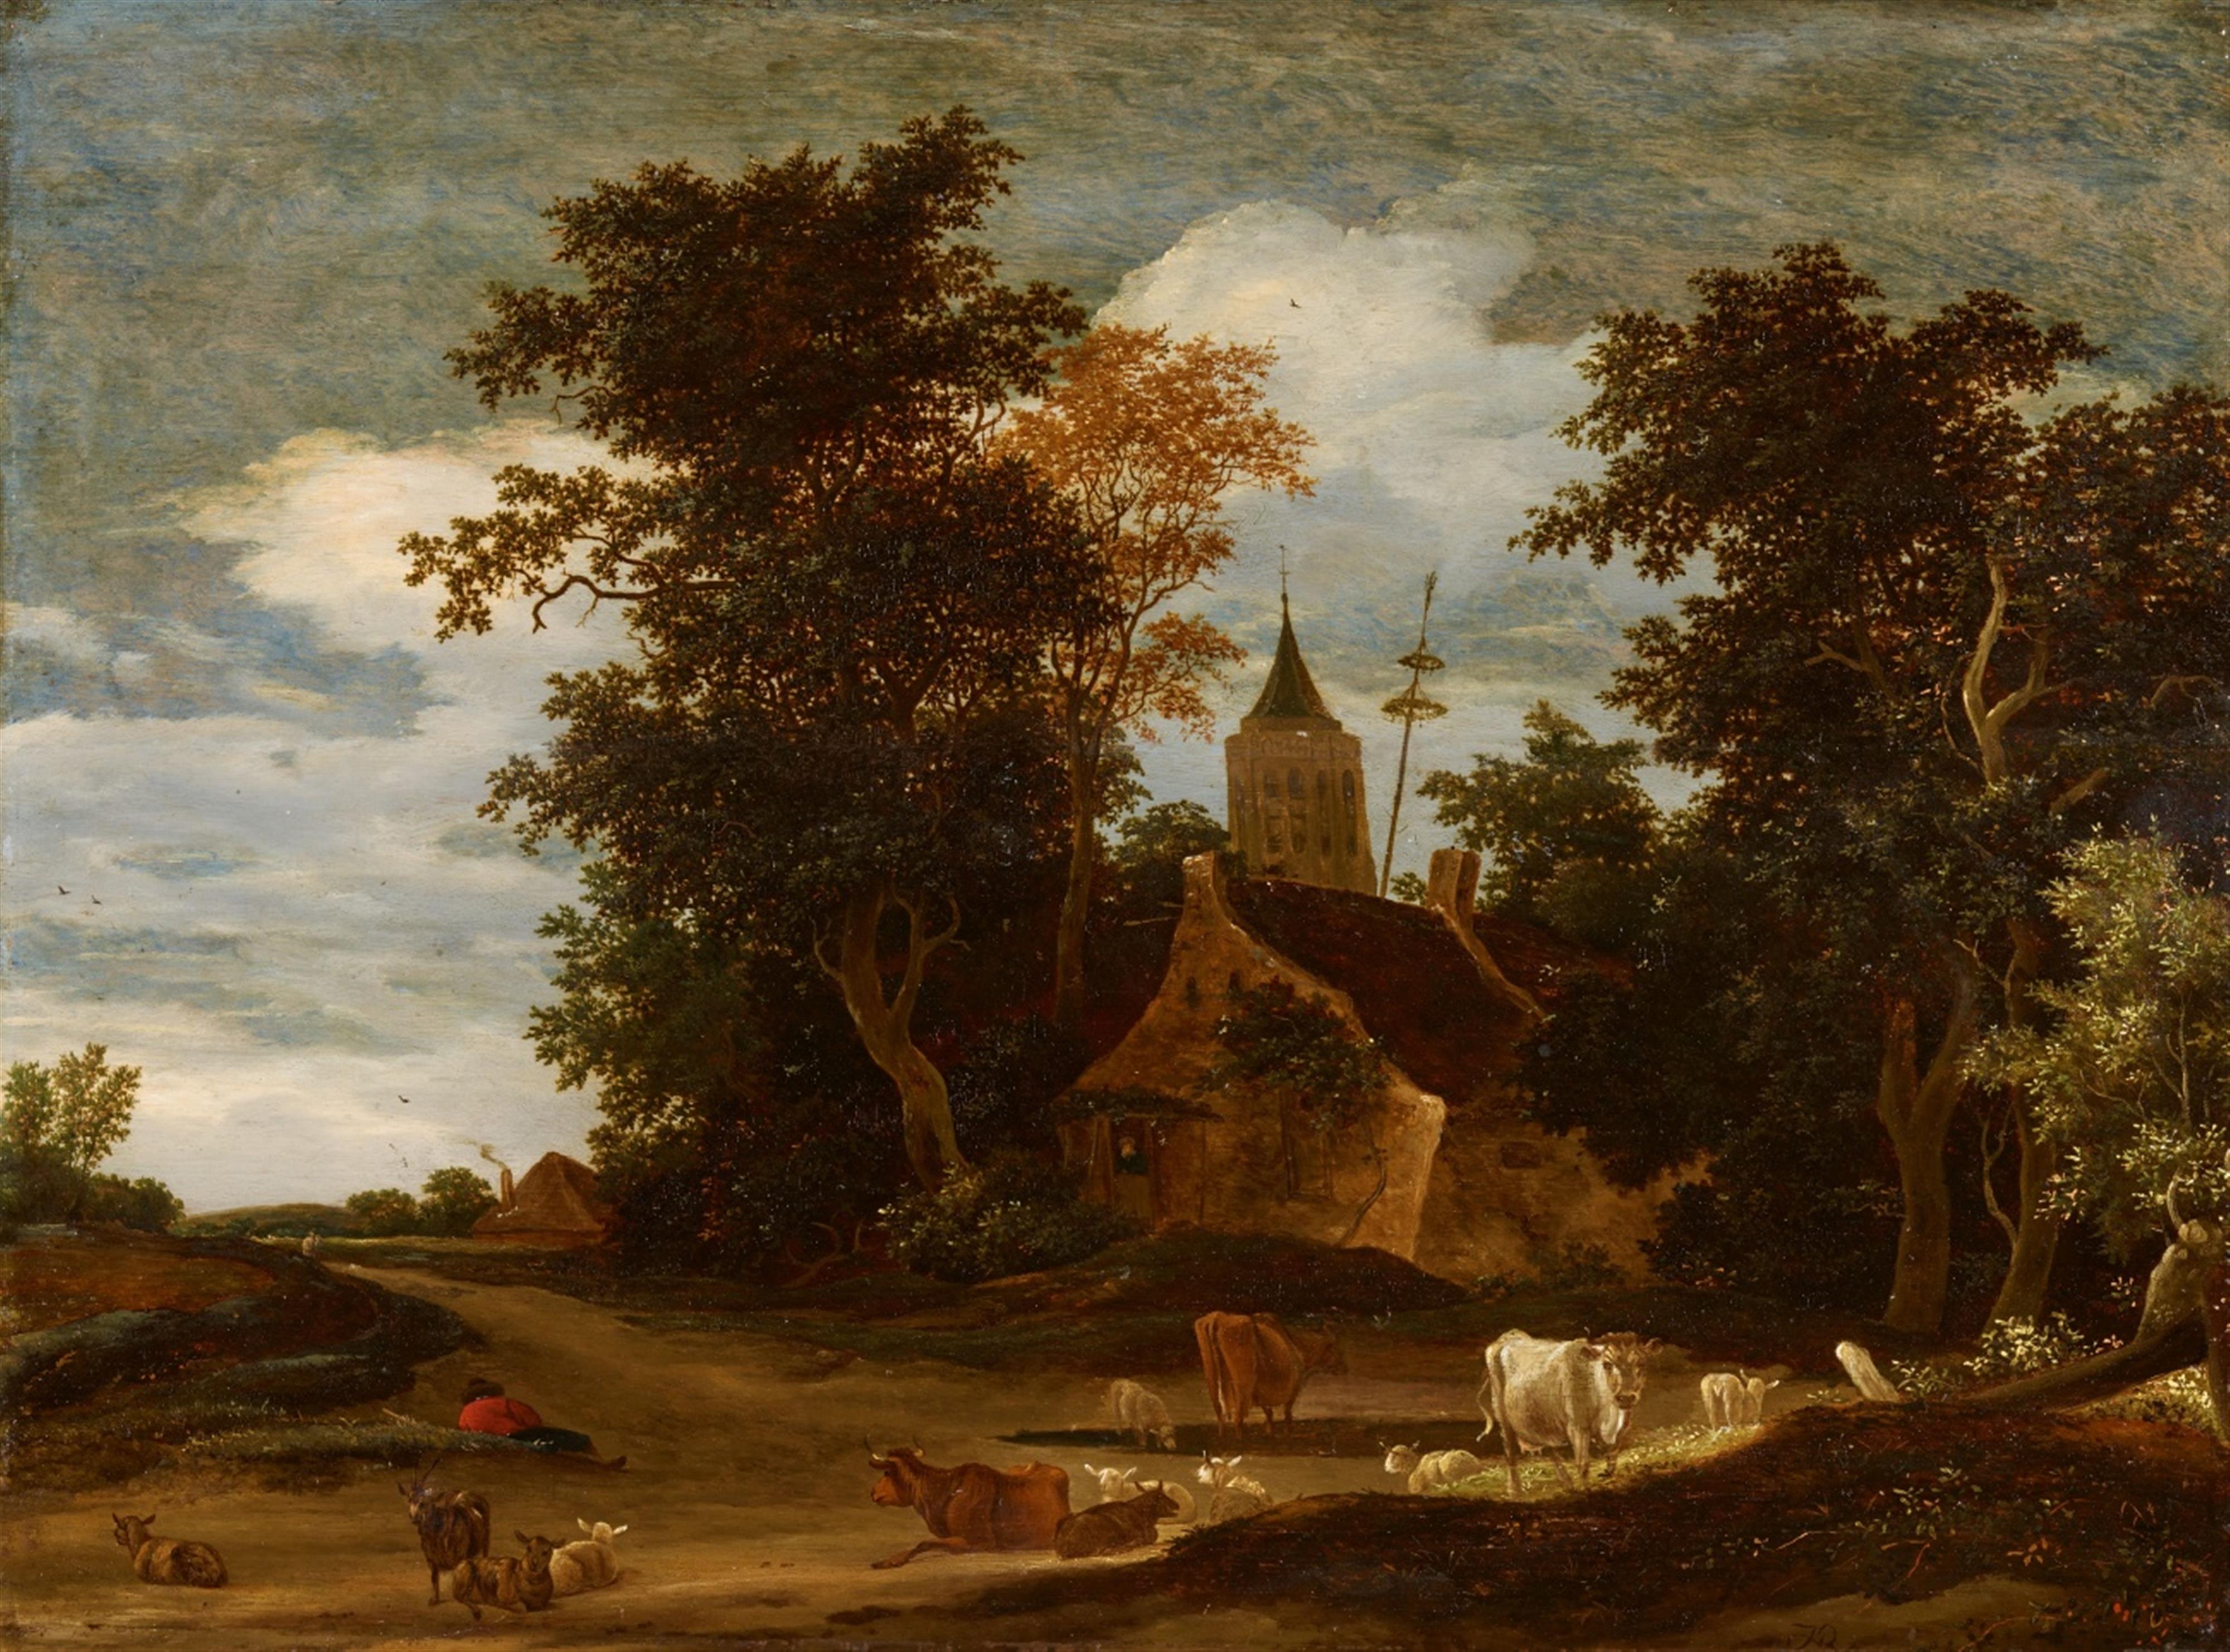 Jacob Salomonsz. van Ruysdael - Wooded Landscape with a Church Spire and Cattle - image-1